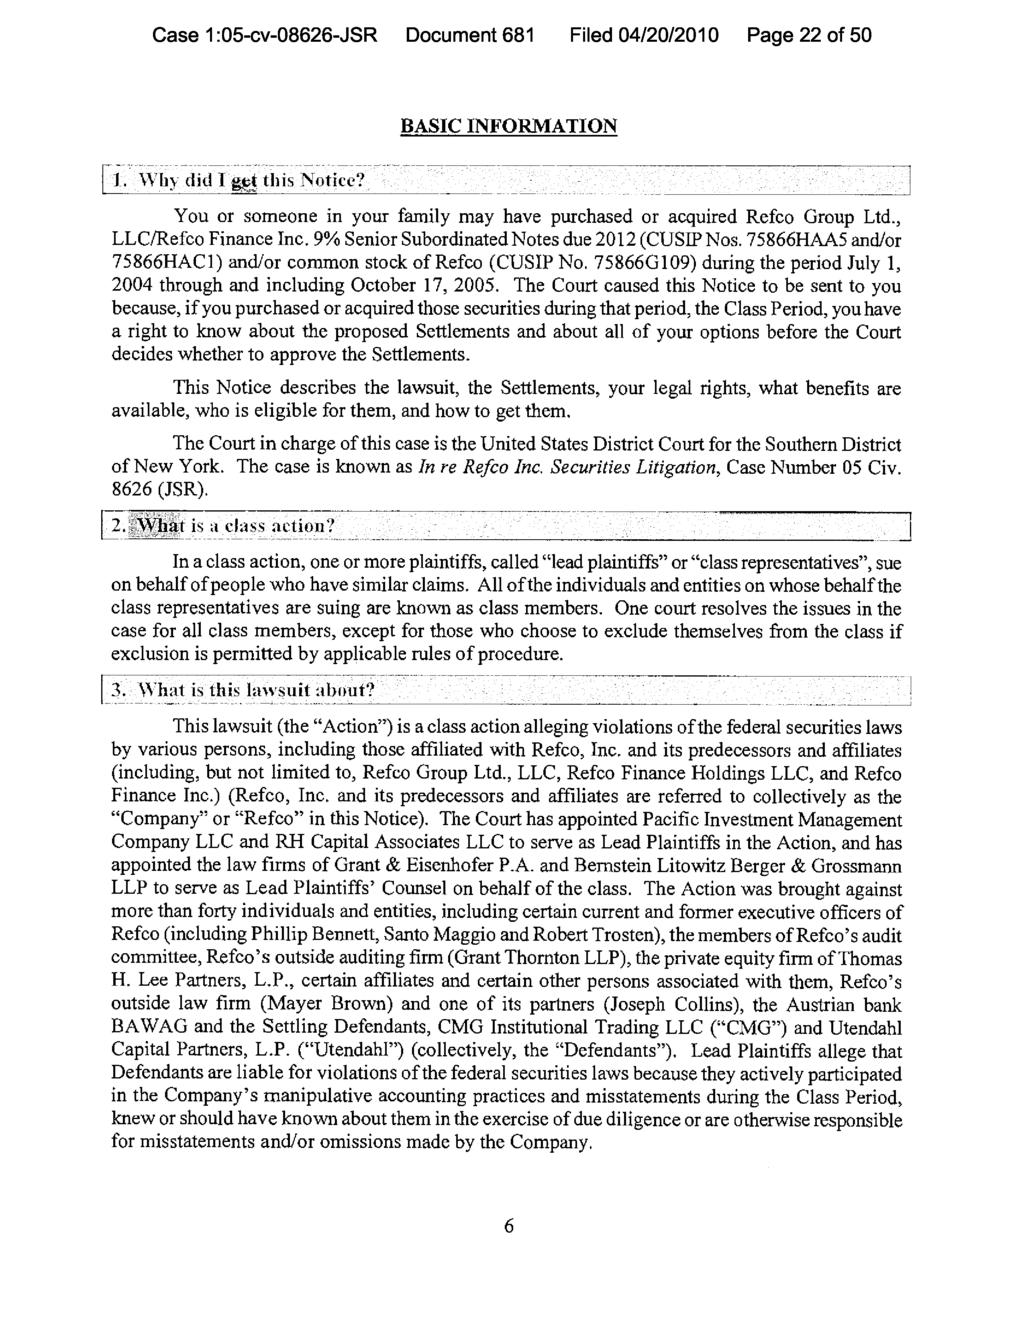 Case 1:05-cv-08626-JSR Document 681 Filed 04/20/2010 Page 22 of 50 BASIC INFORMATION You or someone in your family may have purchased or acquired Refco Group Ltd., LLC/Refco Finance Inc.